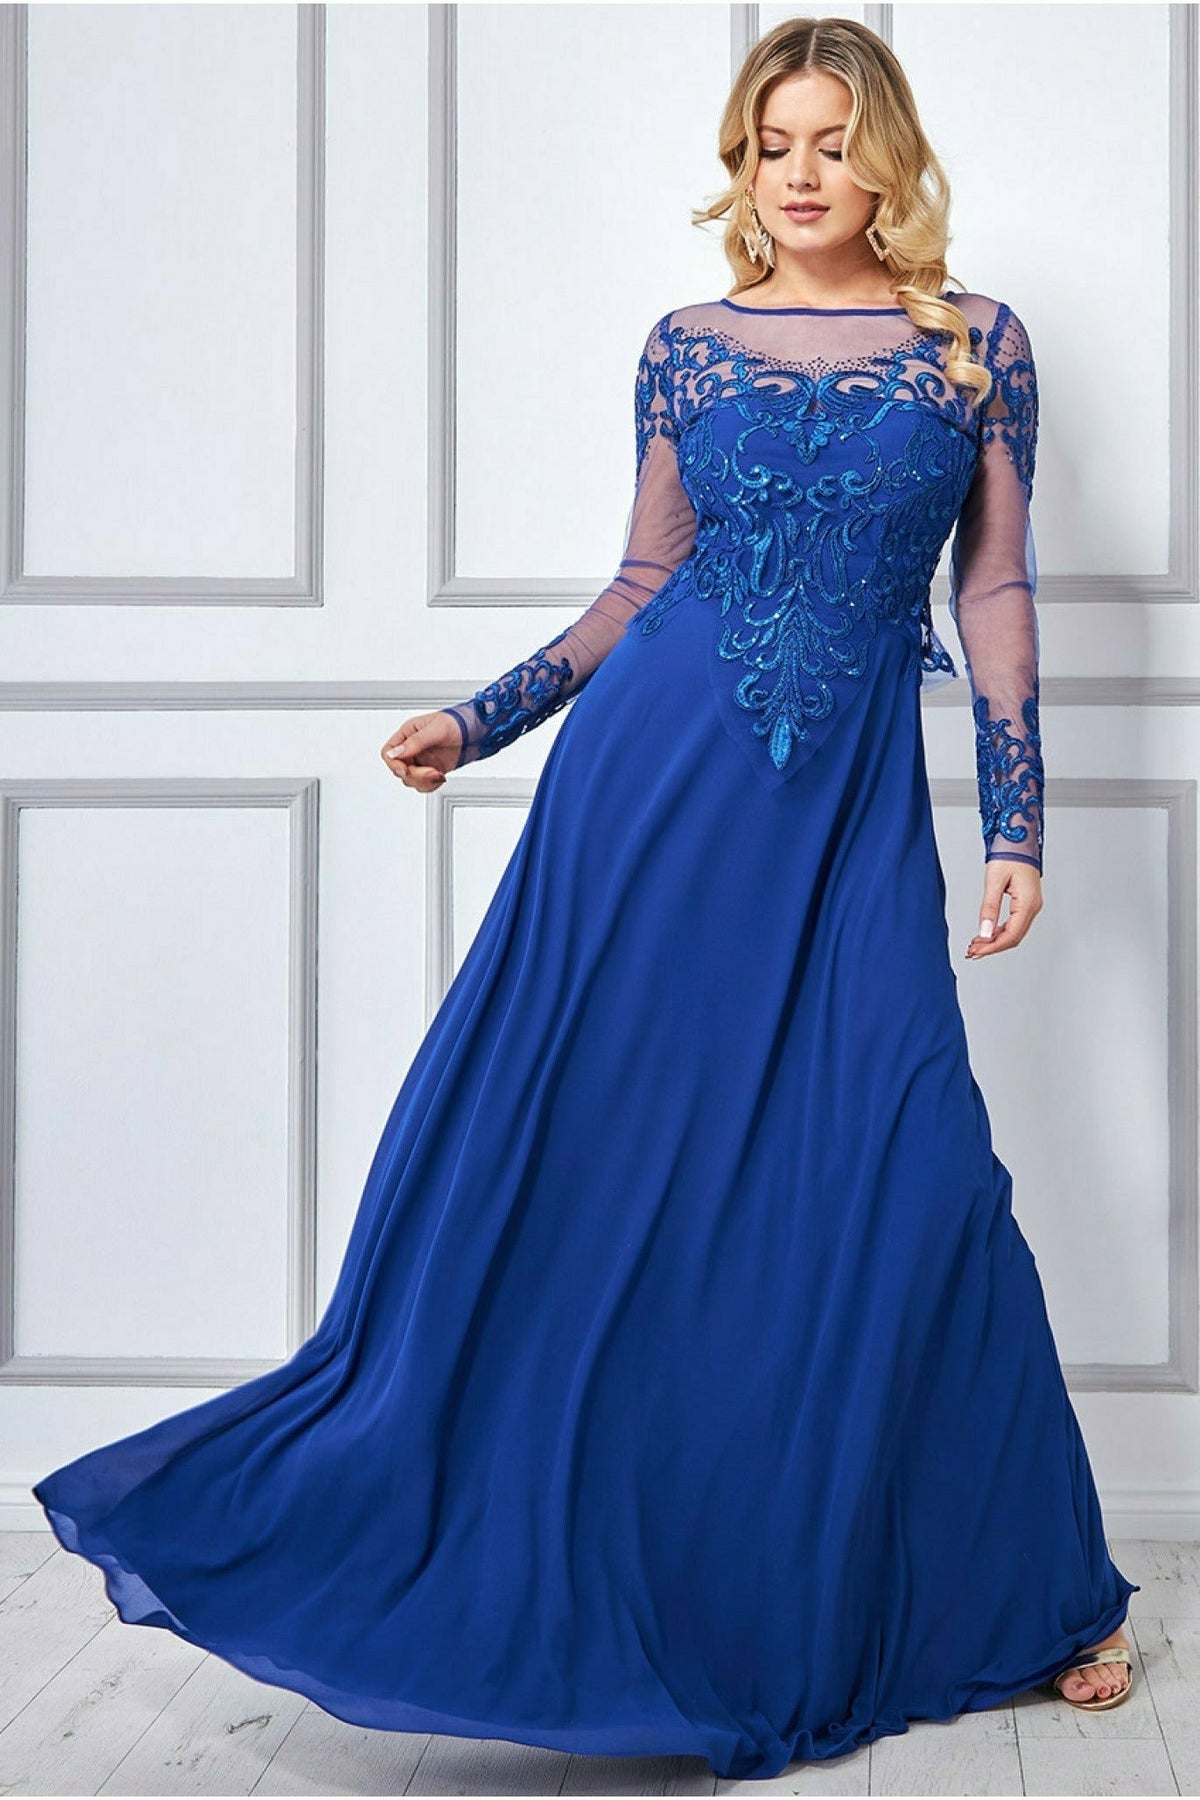 Mesh & Lace Embroidered Bodice Maxi - Royal Blue DR3260